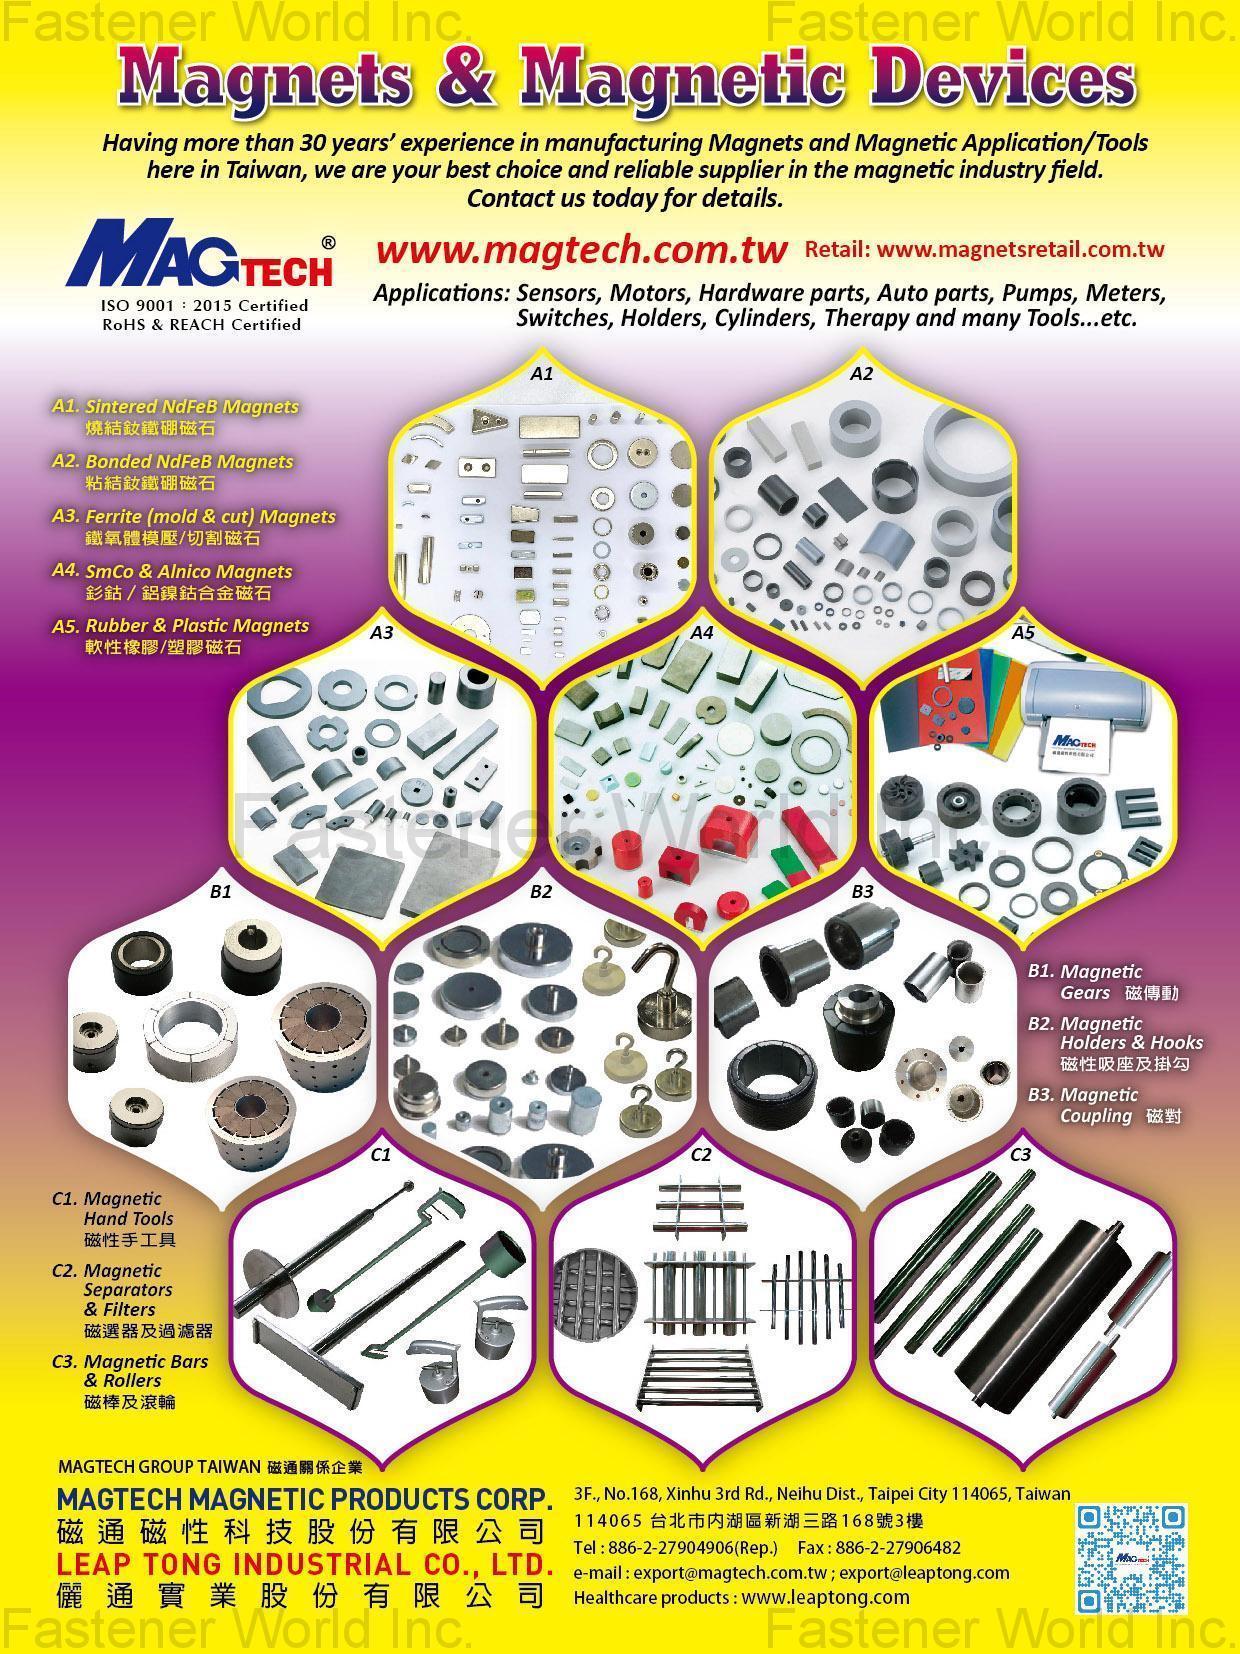 MAGTECH MAGNETIC PRODUCTS CORP. (LEAP TONG)